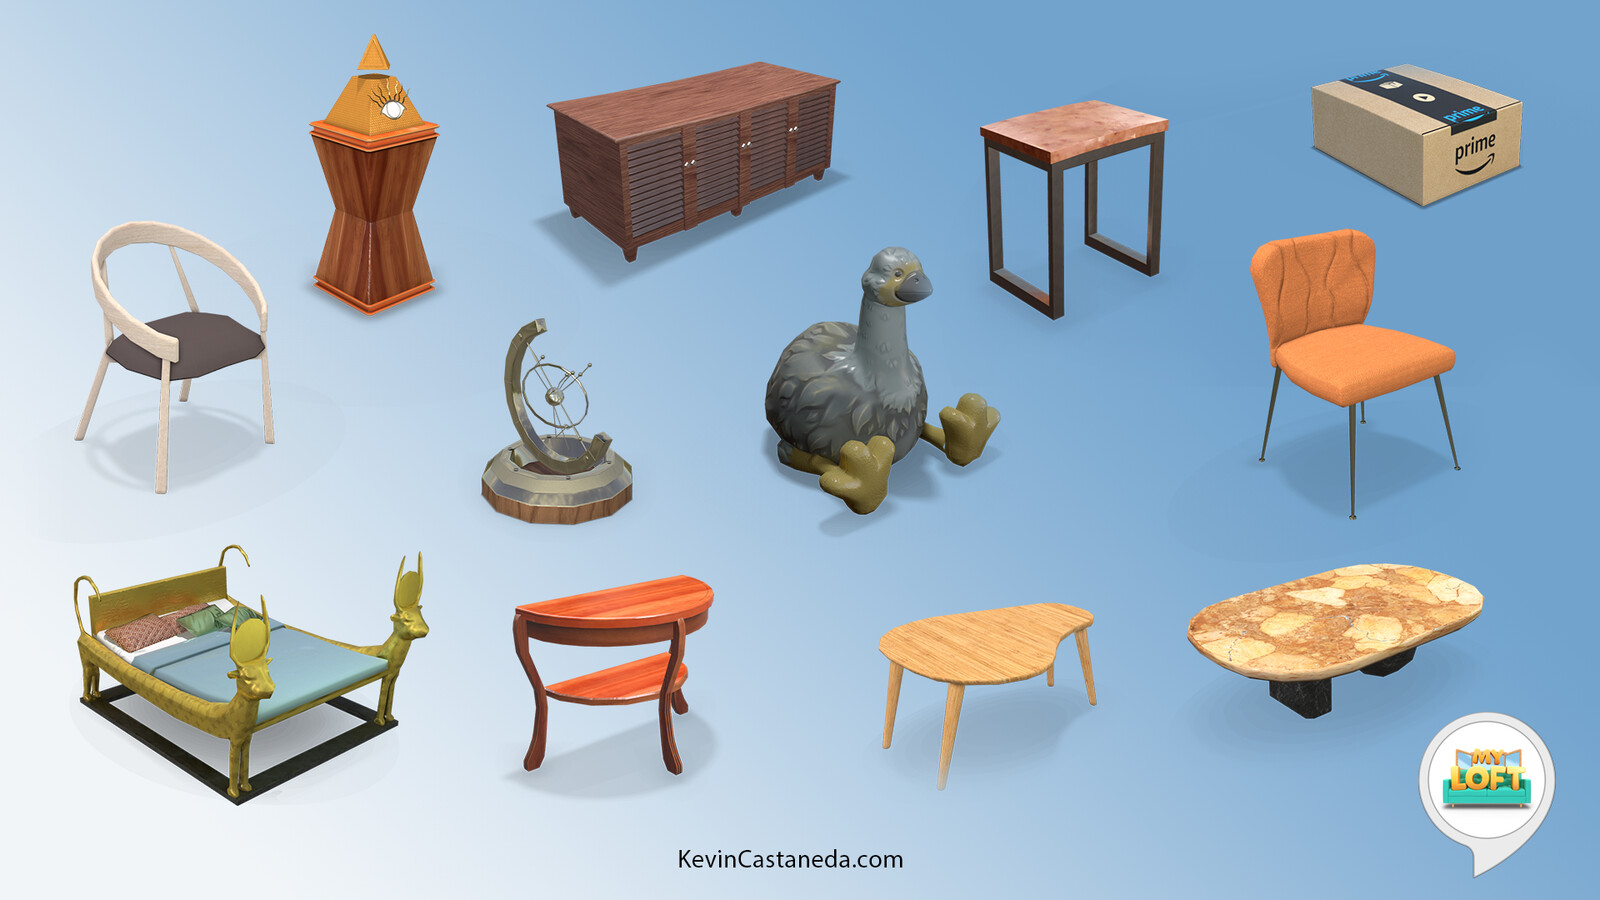 Additional artwork for My Loft. These are misc props that were needed for the game. Some are part of DLC, some are special items granted by guests in the game.